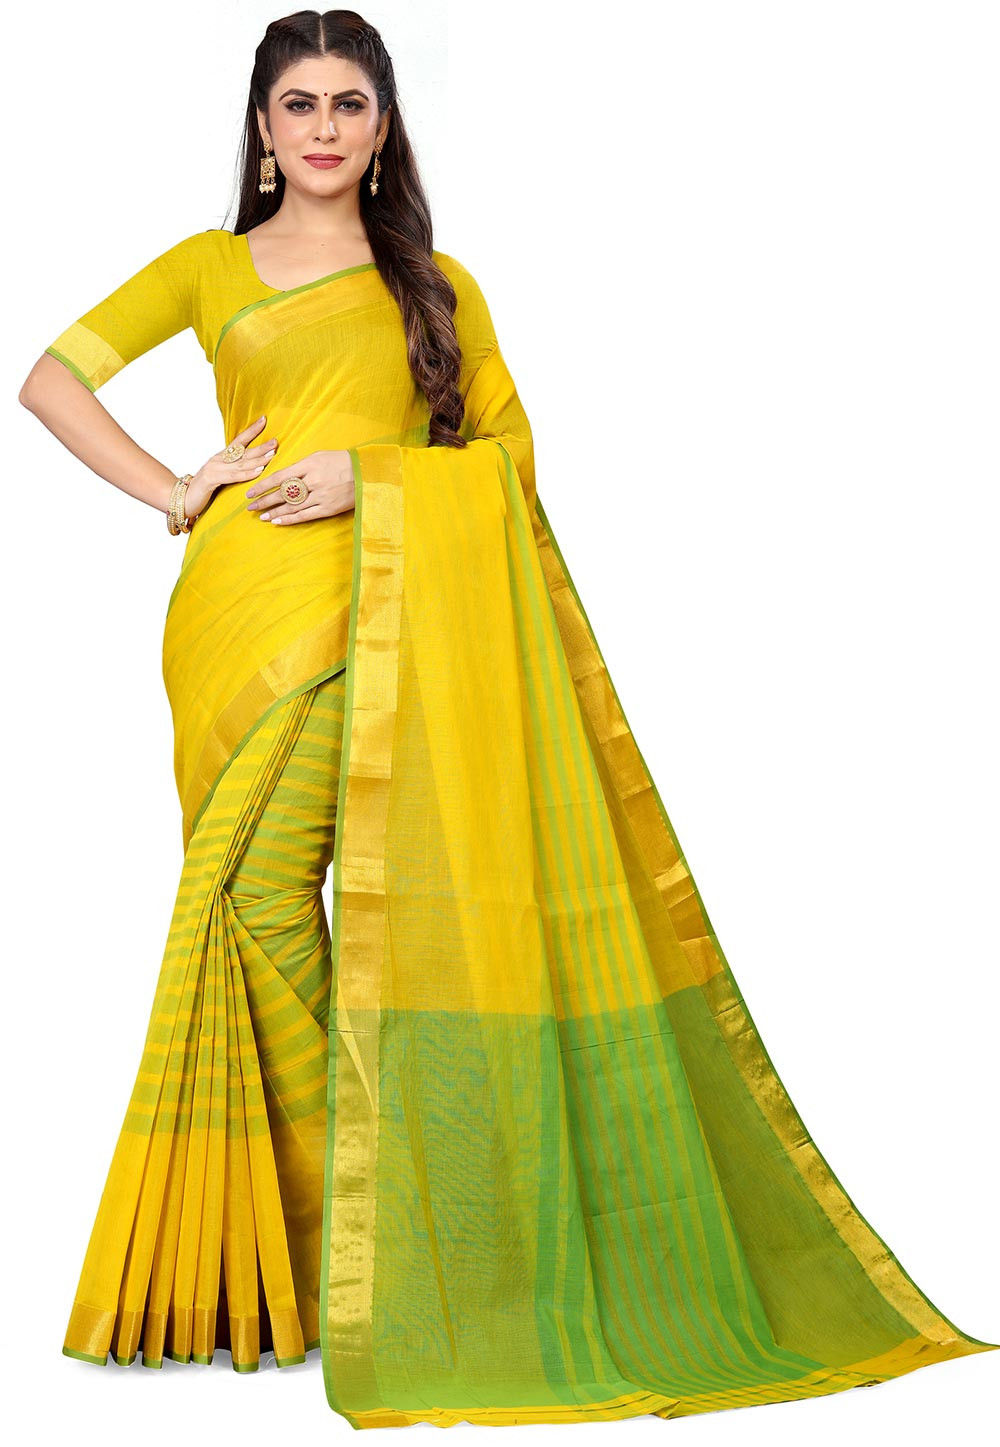 Ladies South Cotton Saree Manufacturer, Supplier From Kolkata, West Bengal  - Latest Price